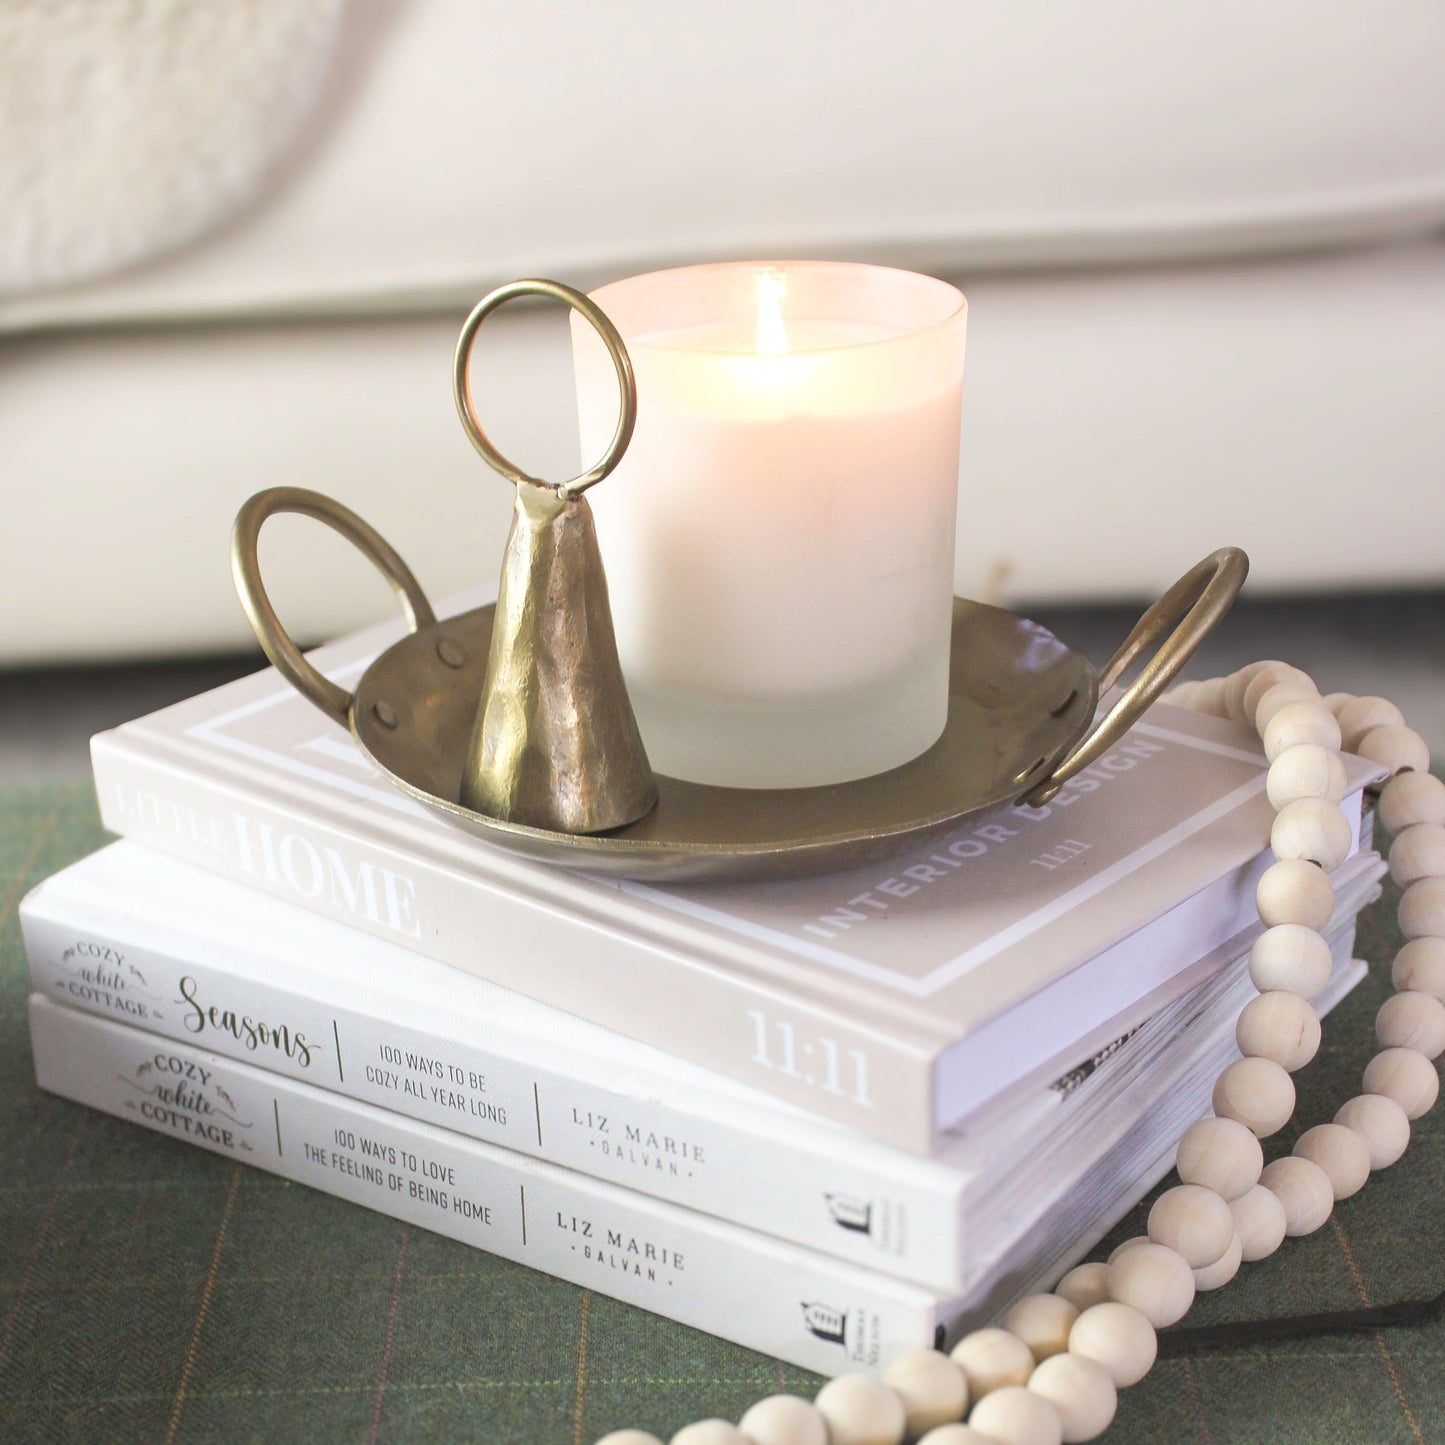 rustic artisan brass candle accessory stand, pair it with our scented candles or brass candle snuffers for styling potential on shelves and coffee tables to add interest, perfect on books or on dressing tables or windowsills